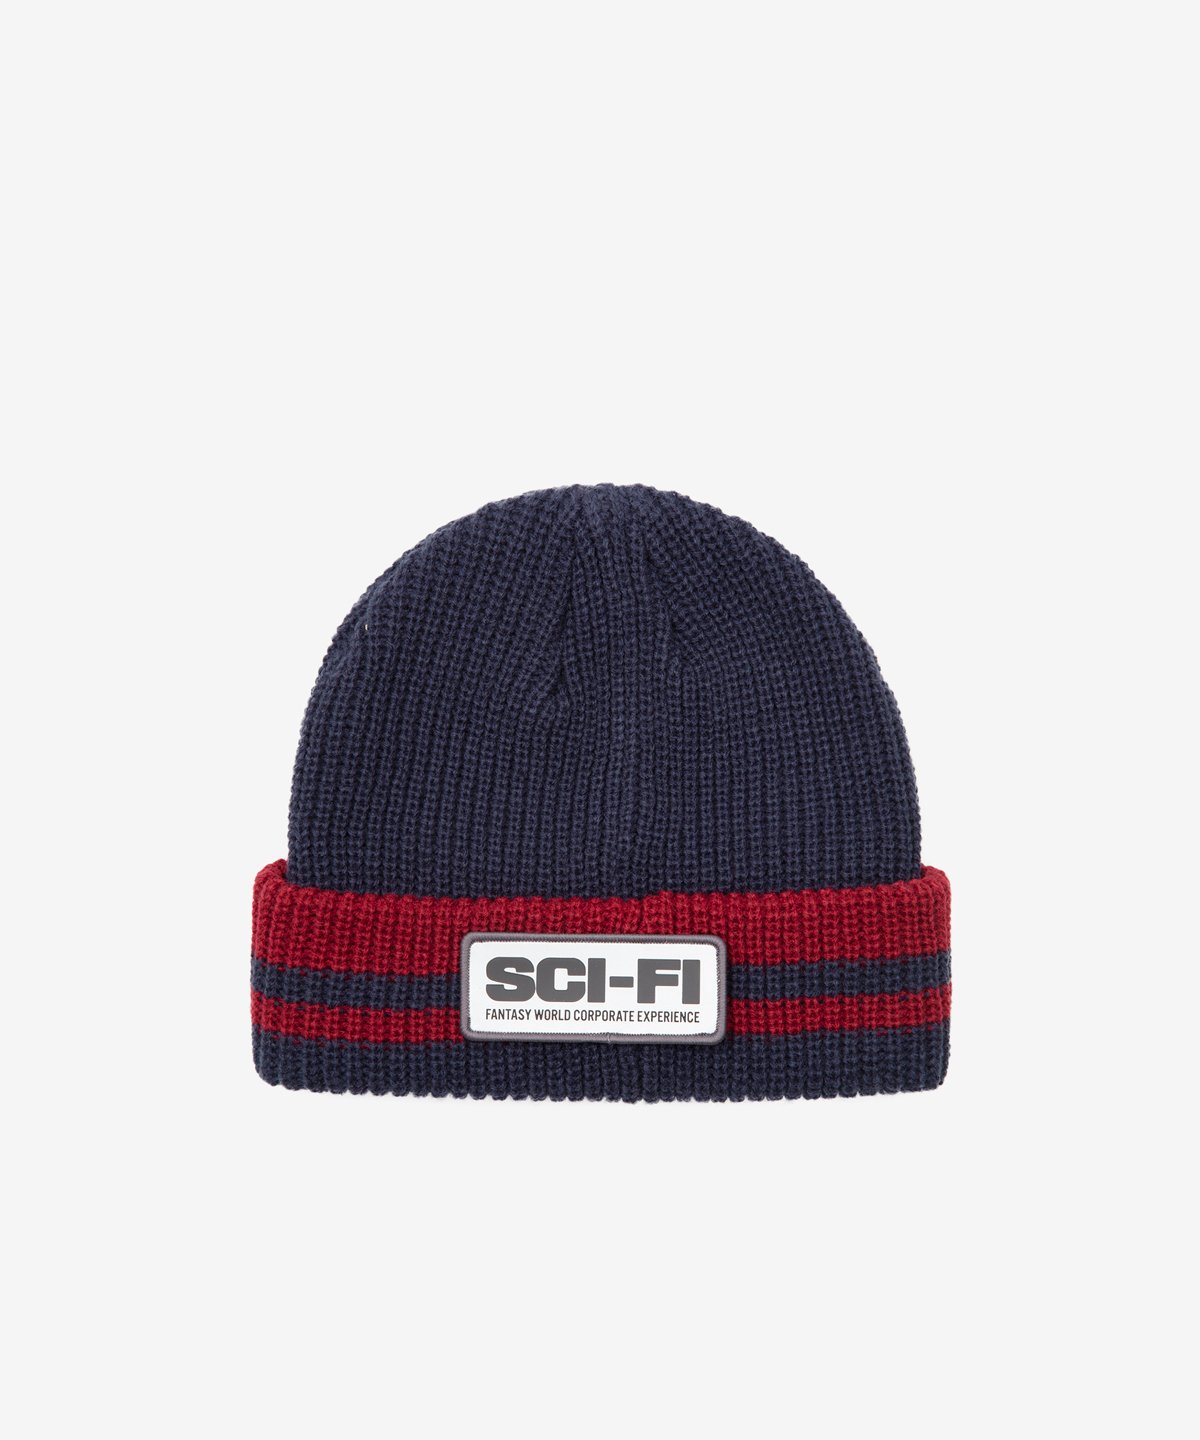 Image of SCI-FI FANTASY_REFLECTIVE STRIPE BEANIE :::NAVY/RED:::